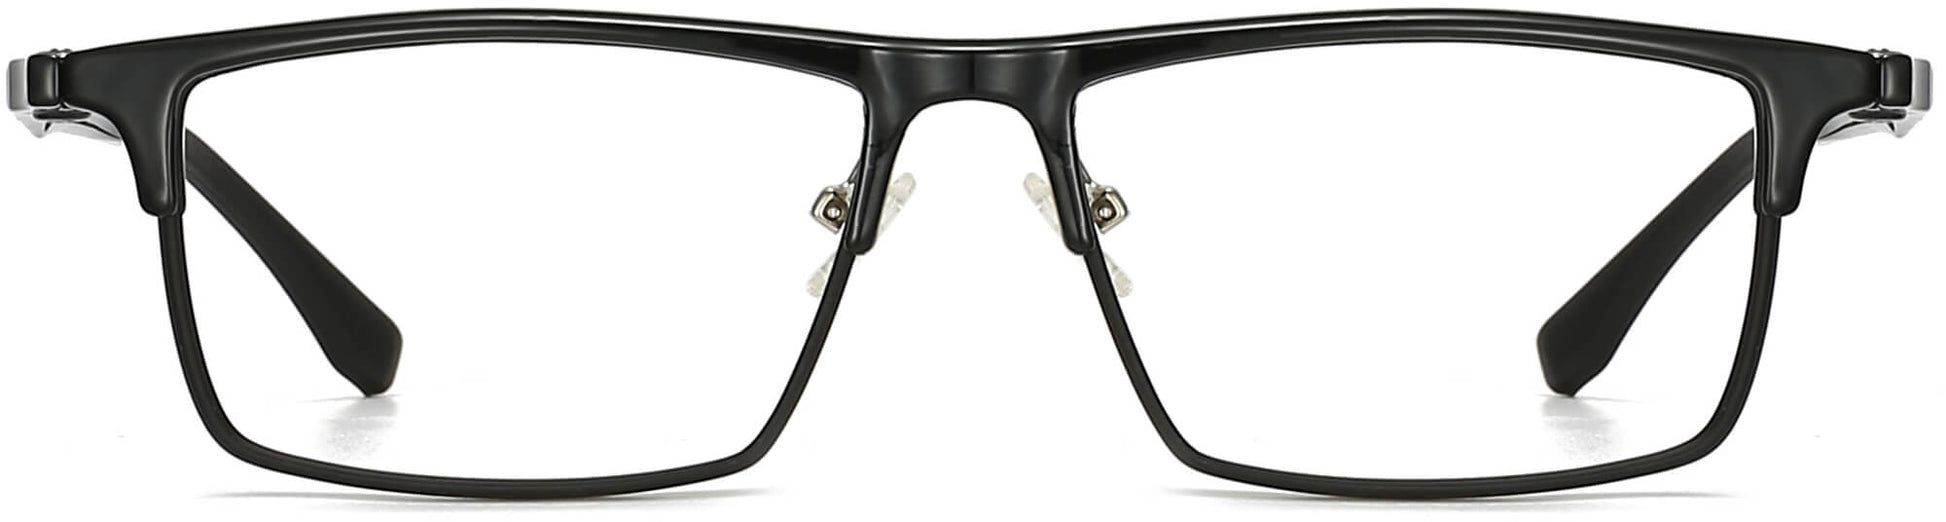 Shawn Rectangle Black Eyeglasses from ANRRI, front view